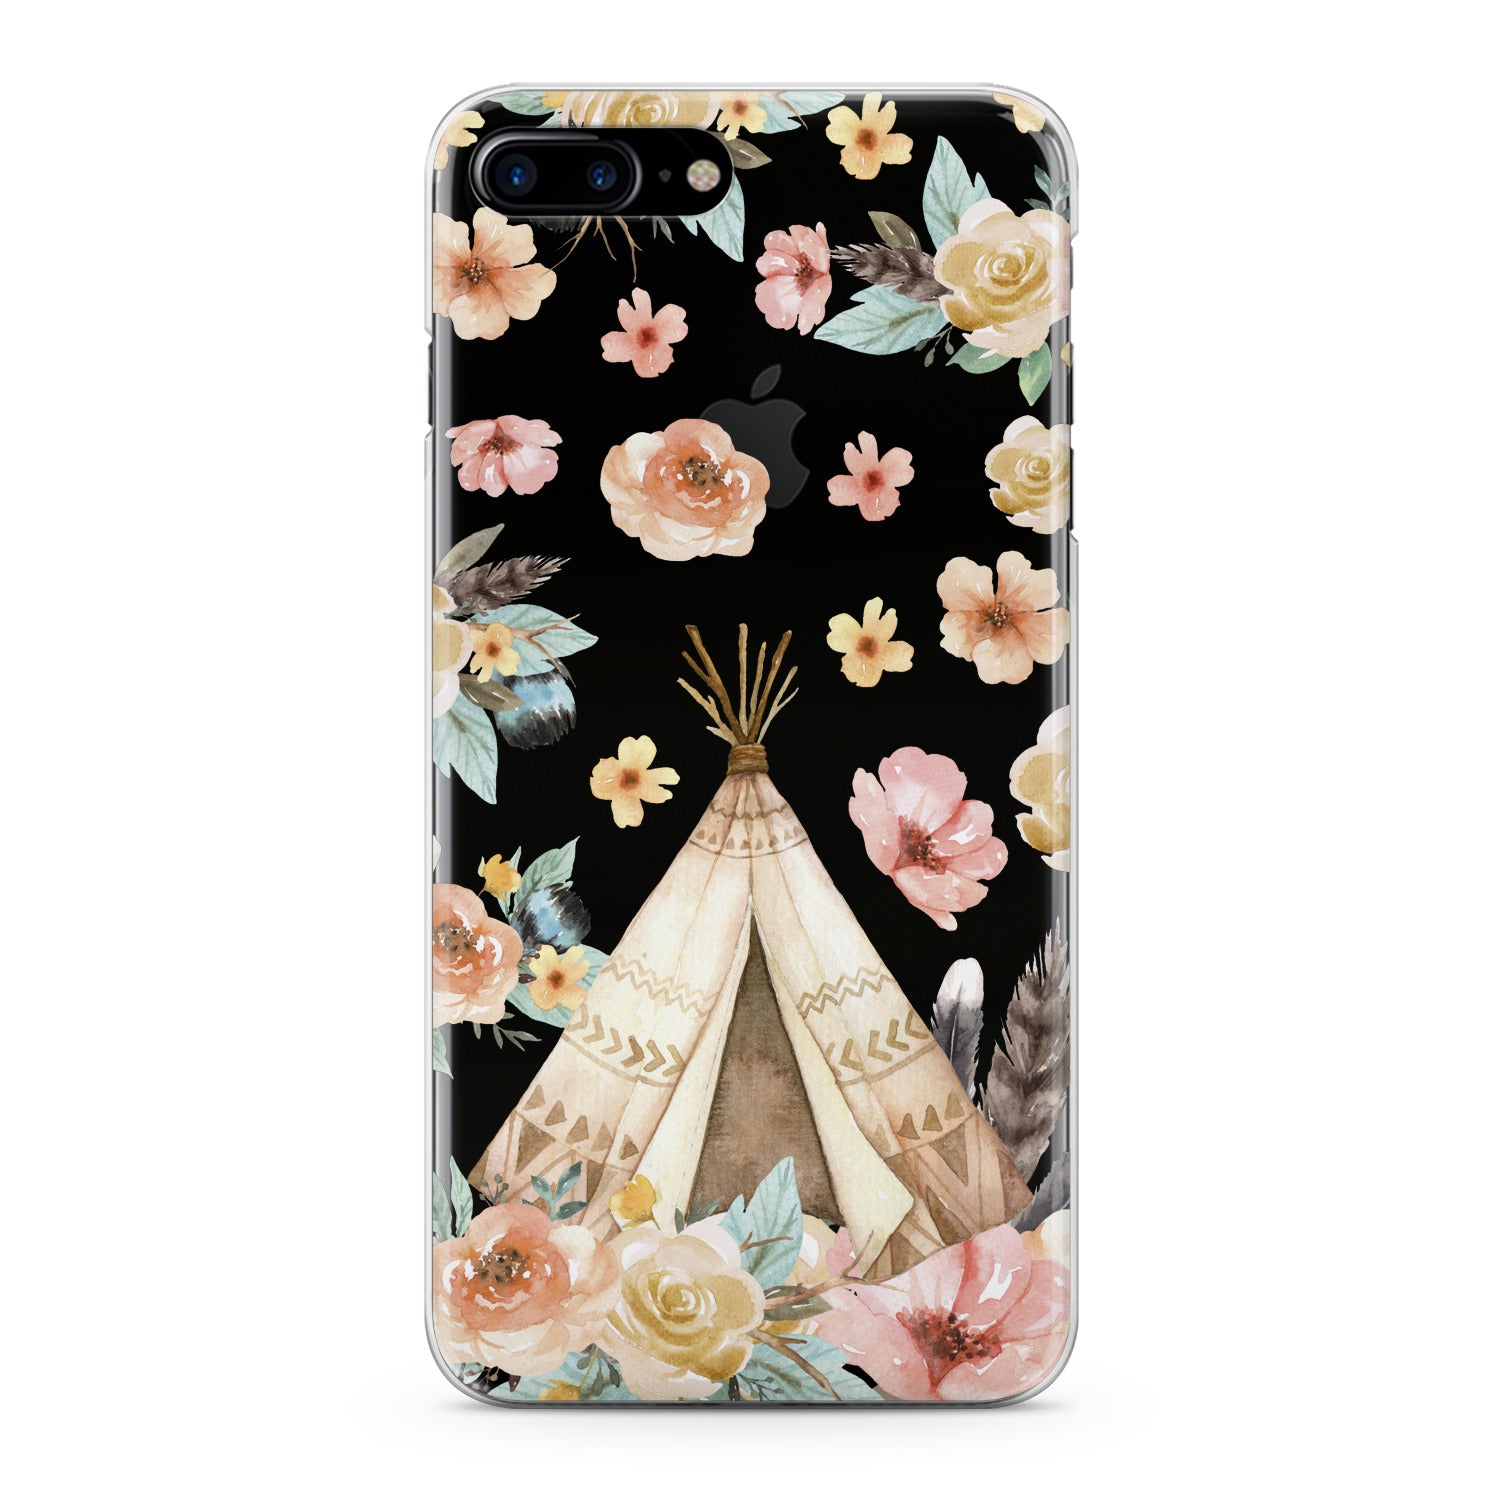 Lex Altern Floral Wigwam Phone Case for your iPhone & Android phone.